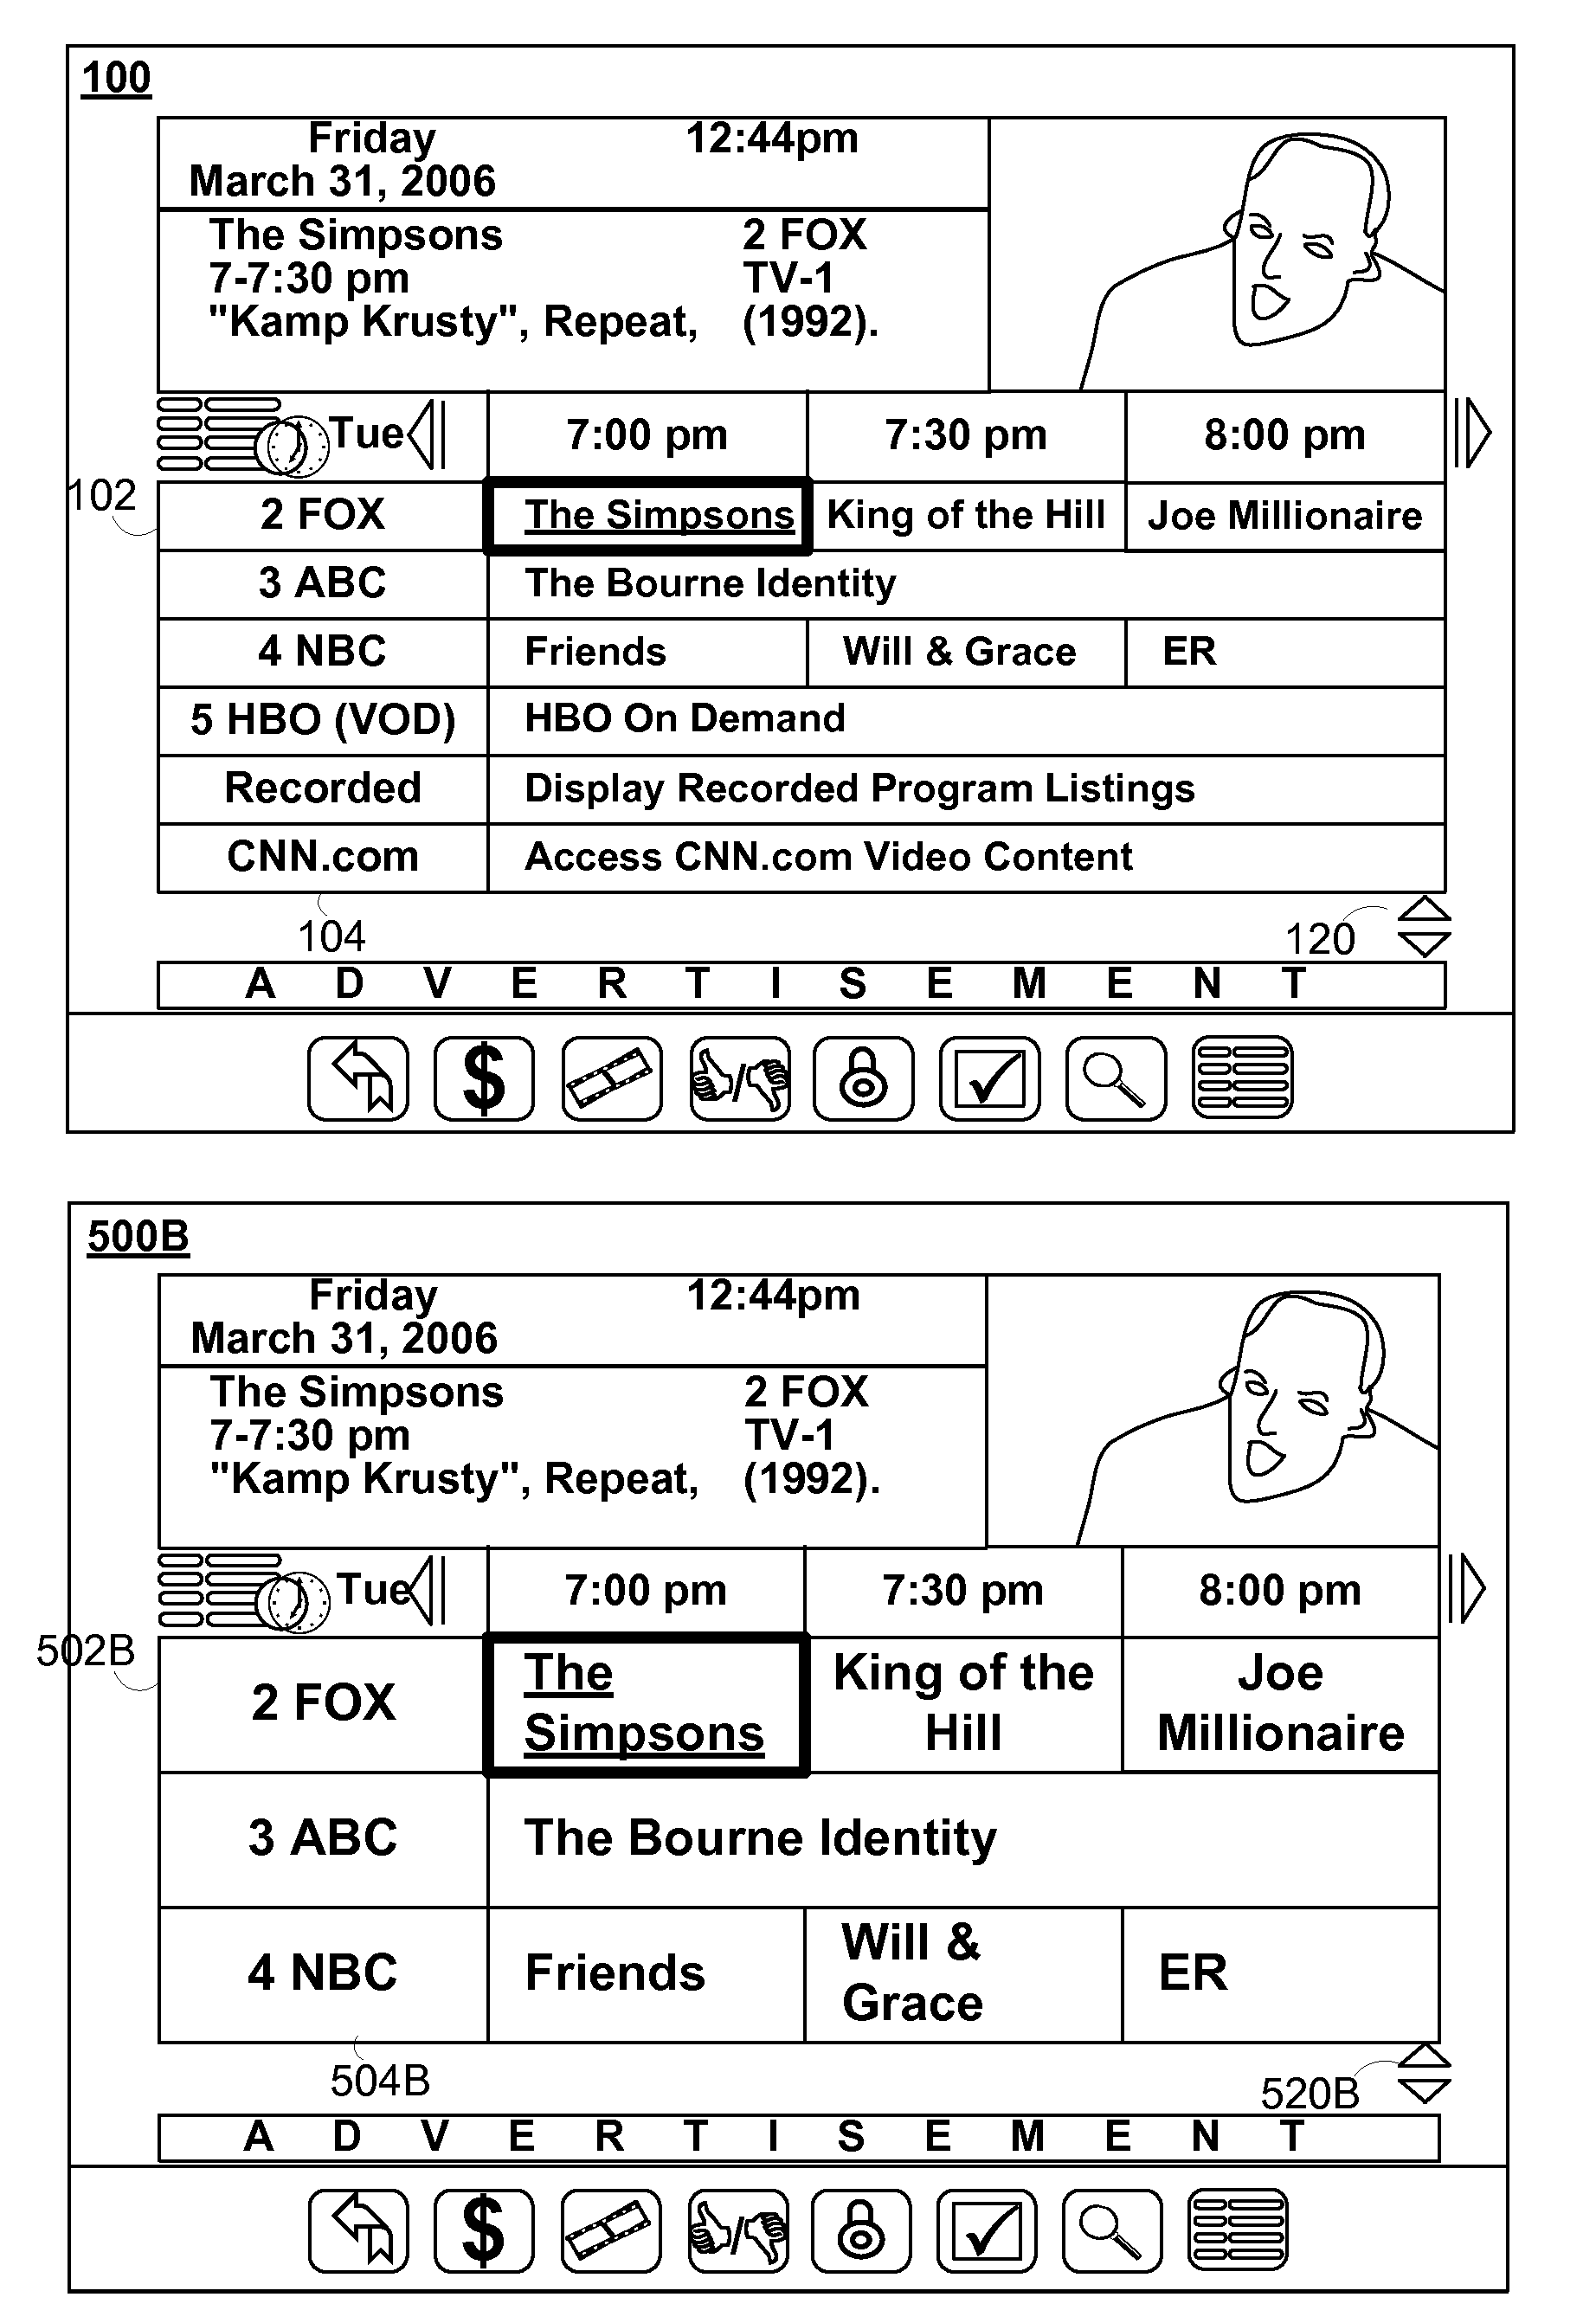 Systems and methods for adjusting media guide interaction modes